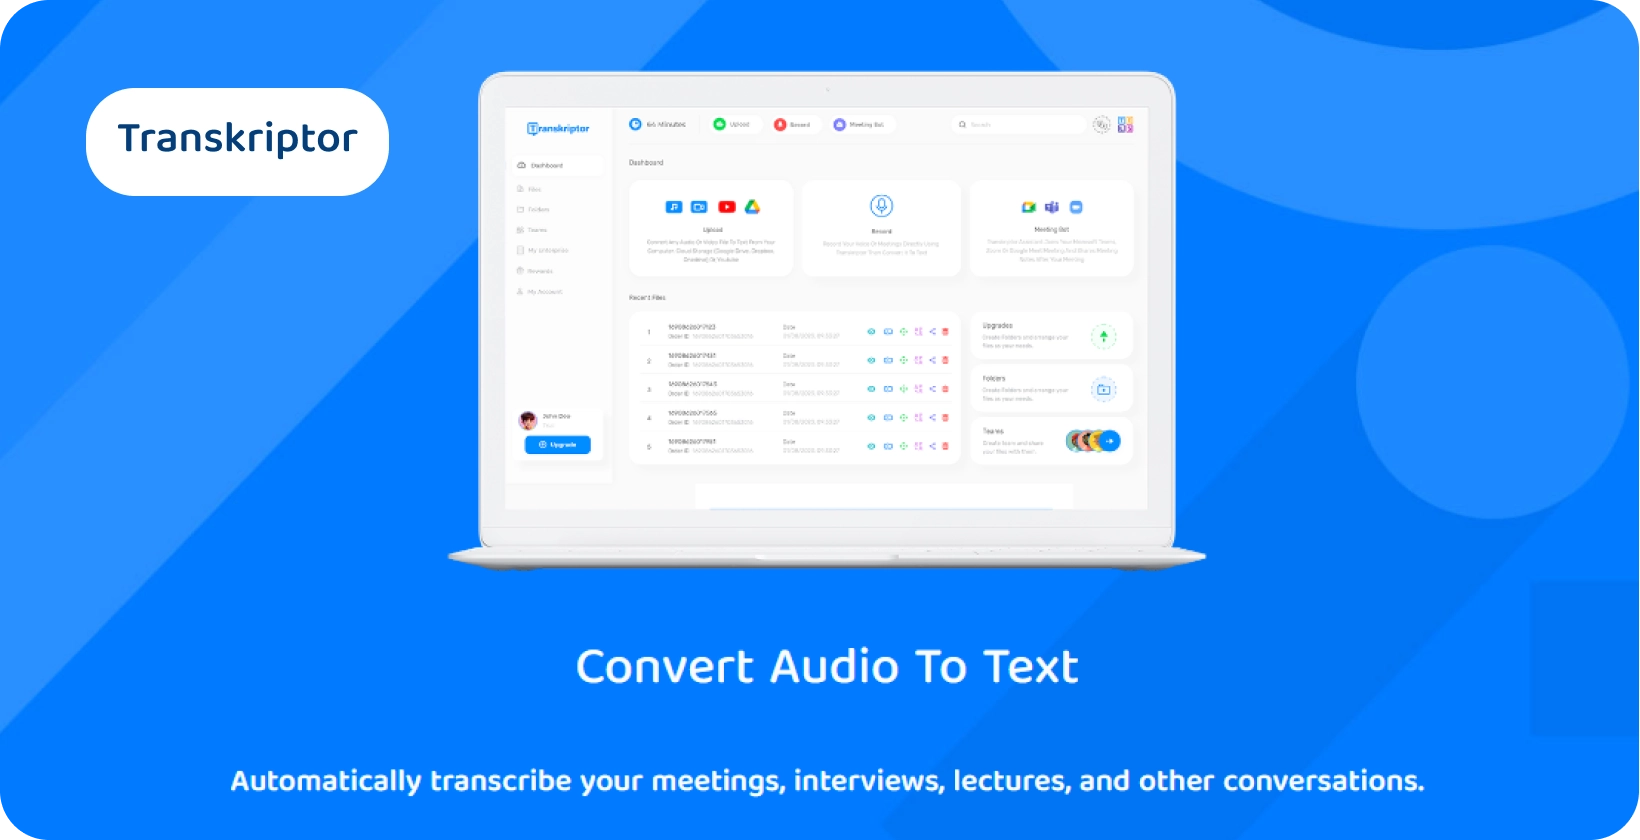 Transkriptor's dashboard showcasing its audio to text conversion features for efficient transcription.